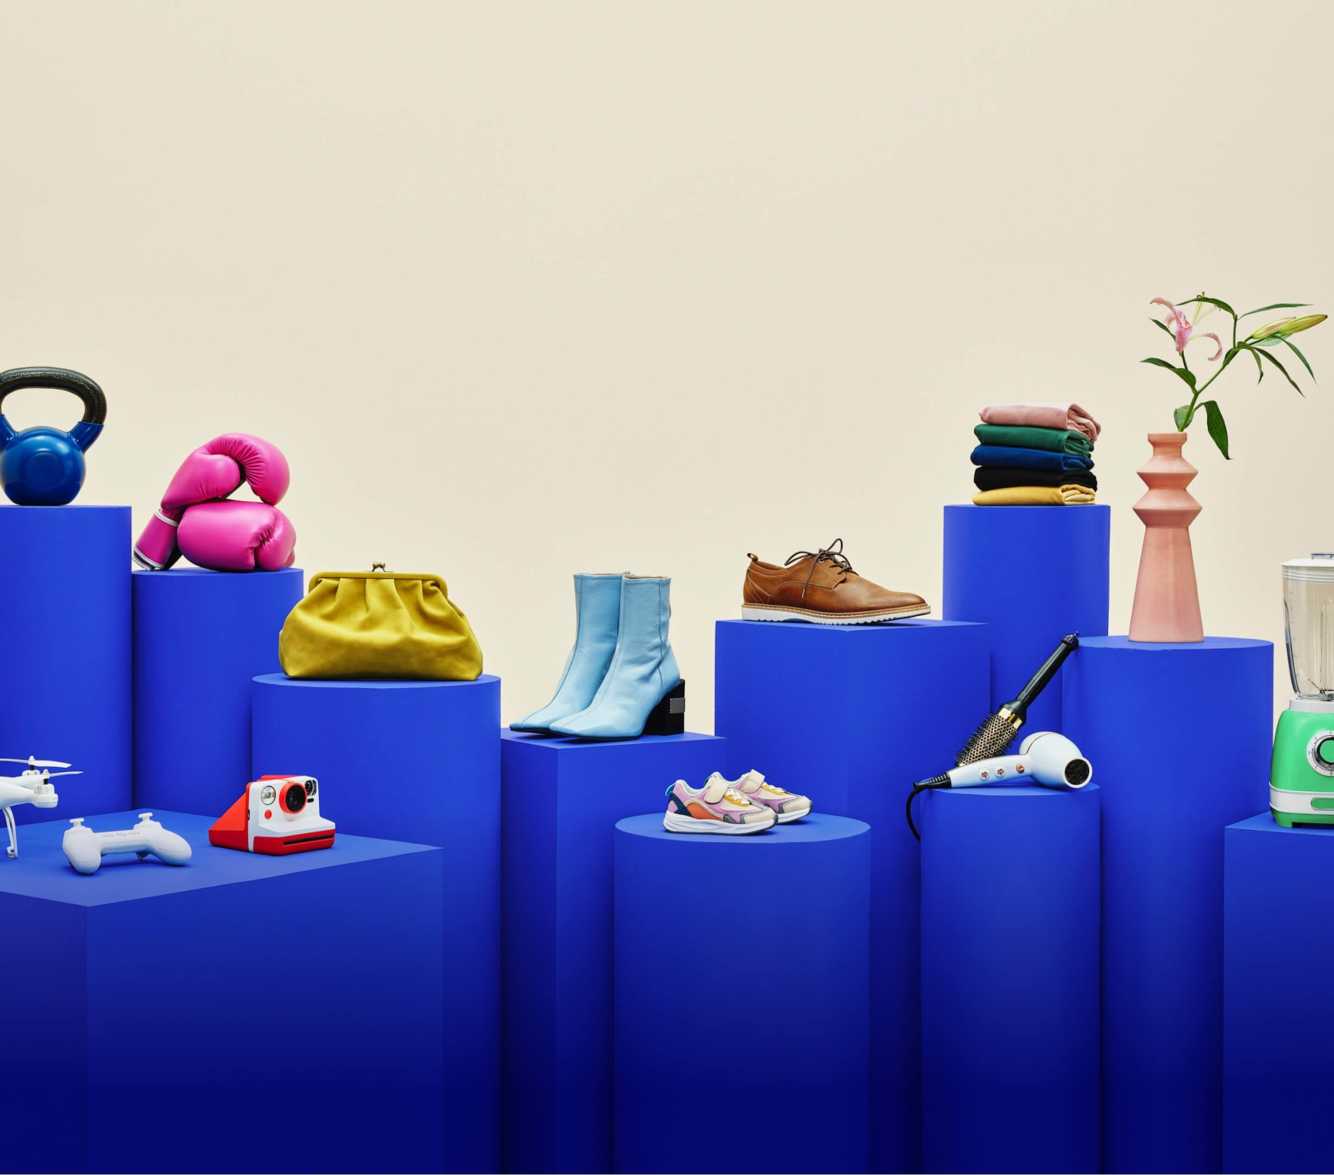 image of shoes and various objects on blue pedestals